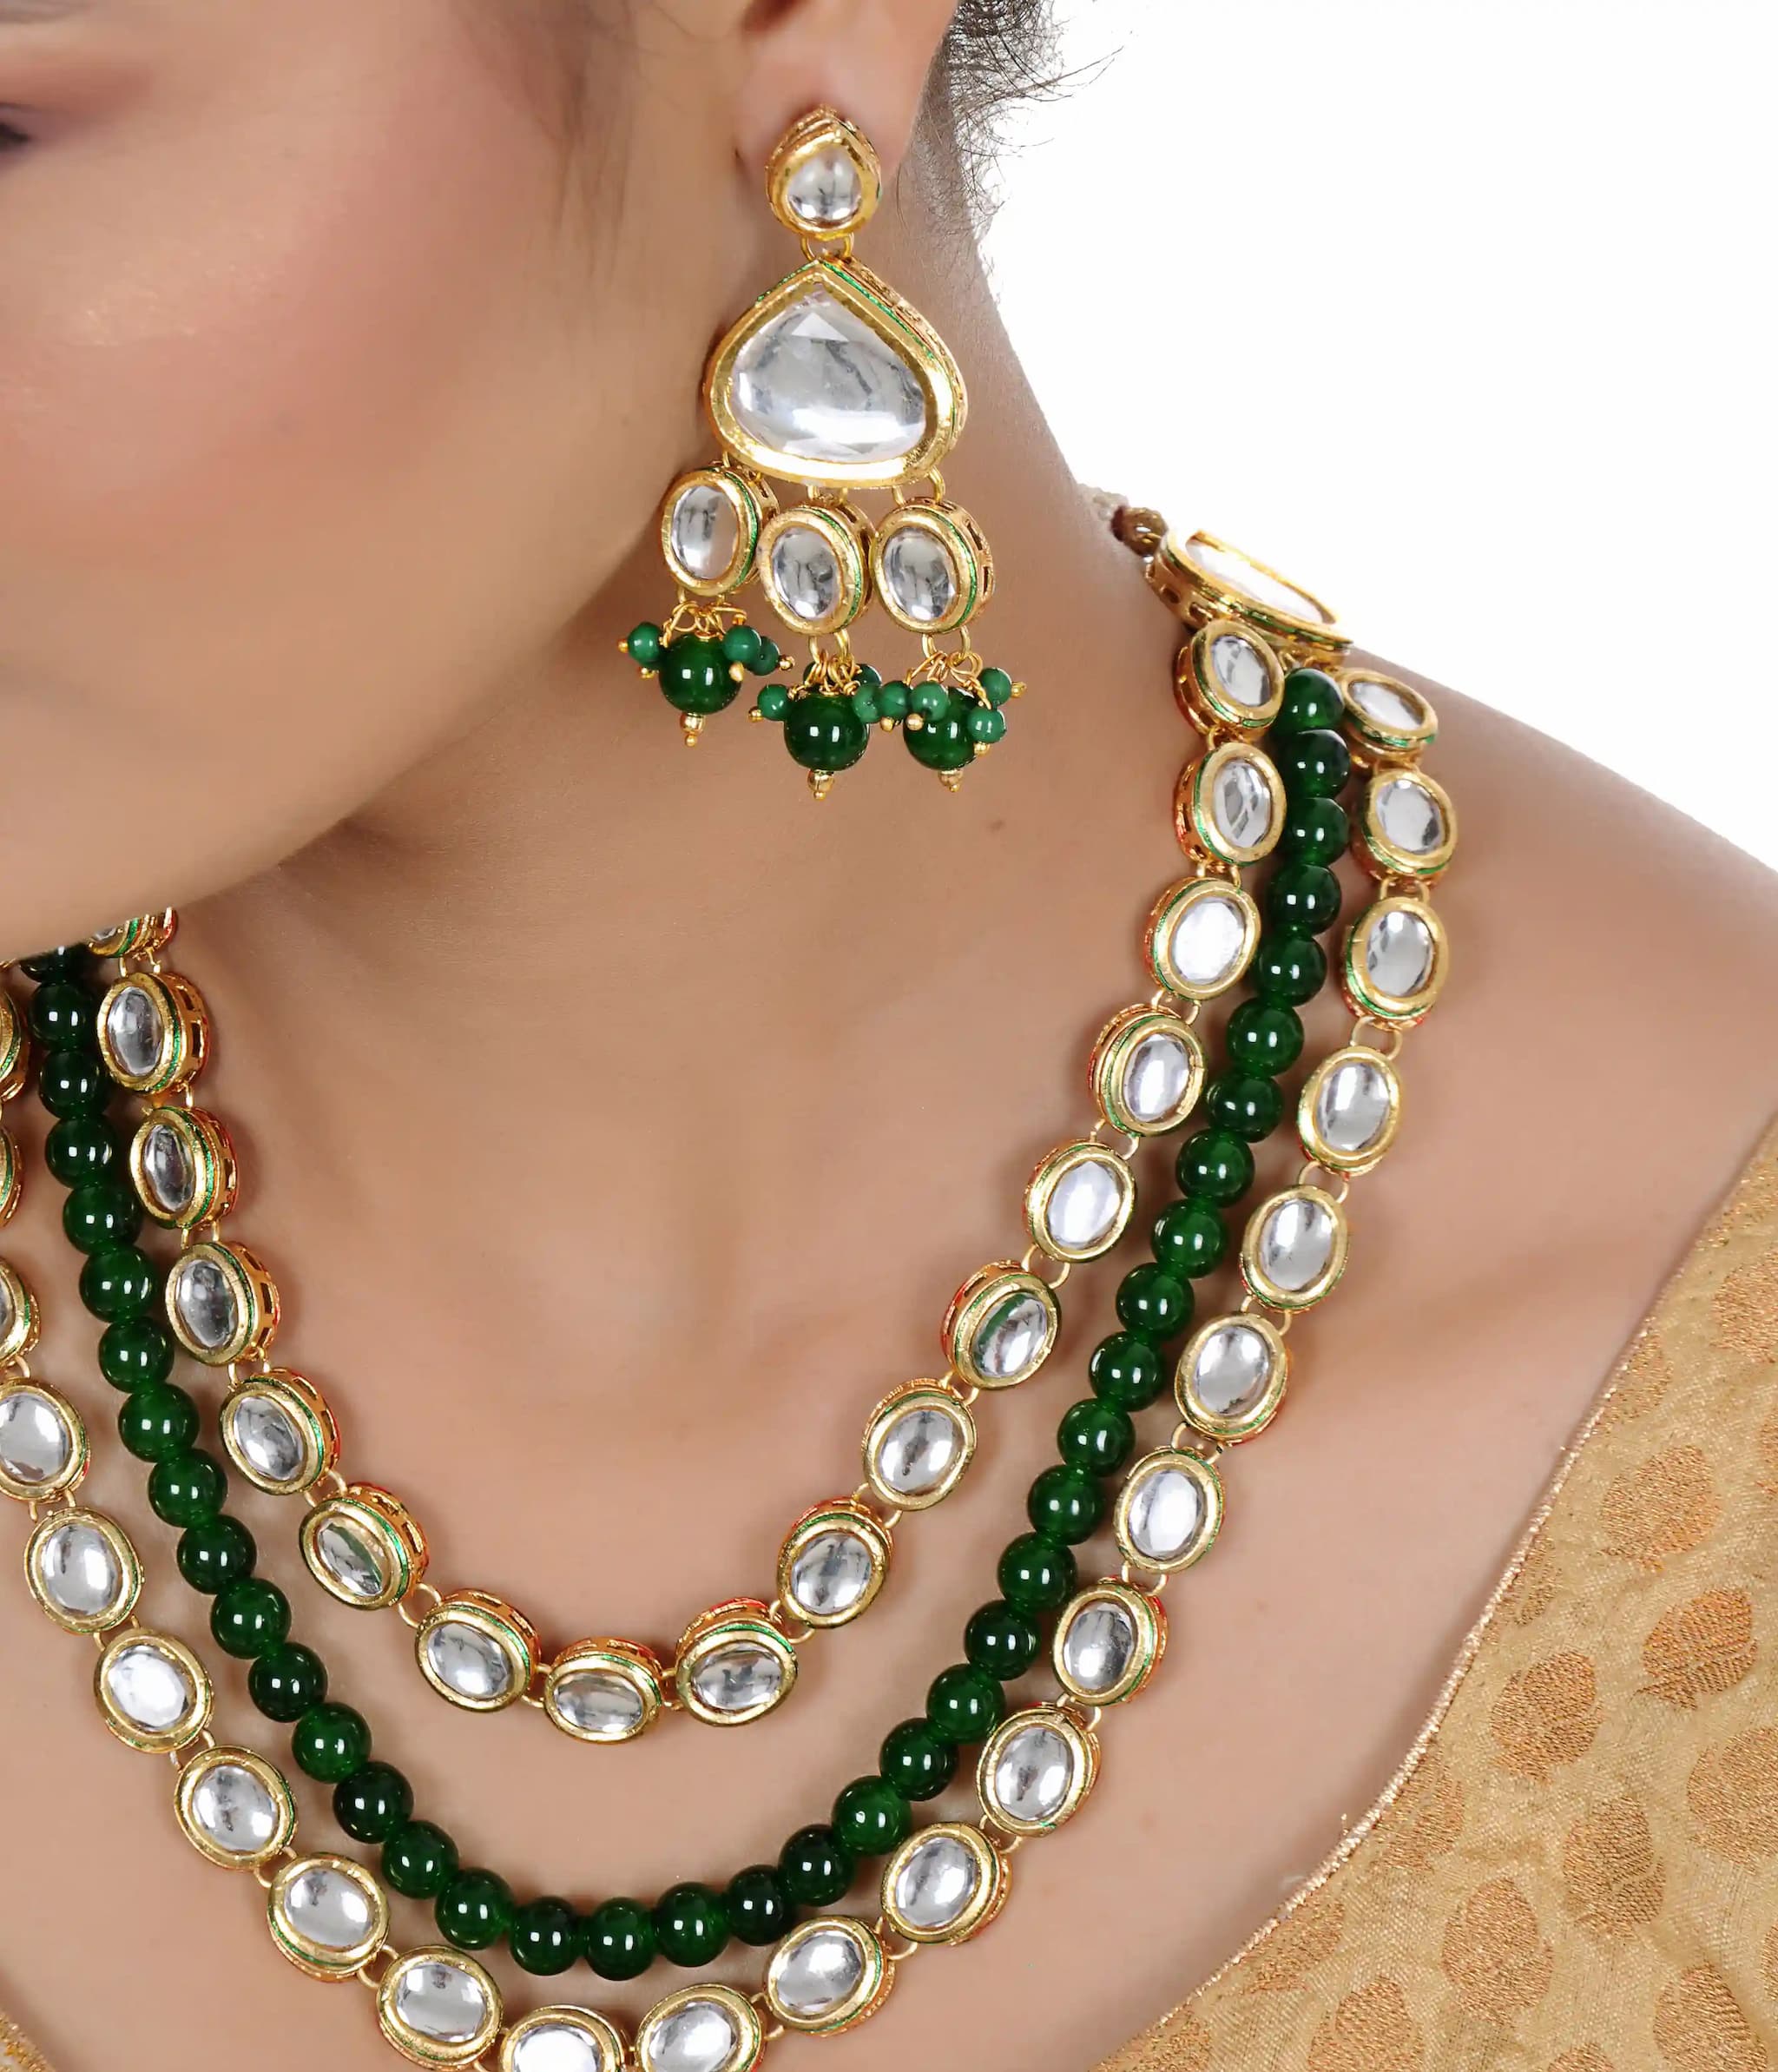 Gold Plated(18k) Stone Necklace With Earrings - Green